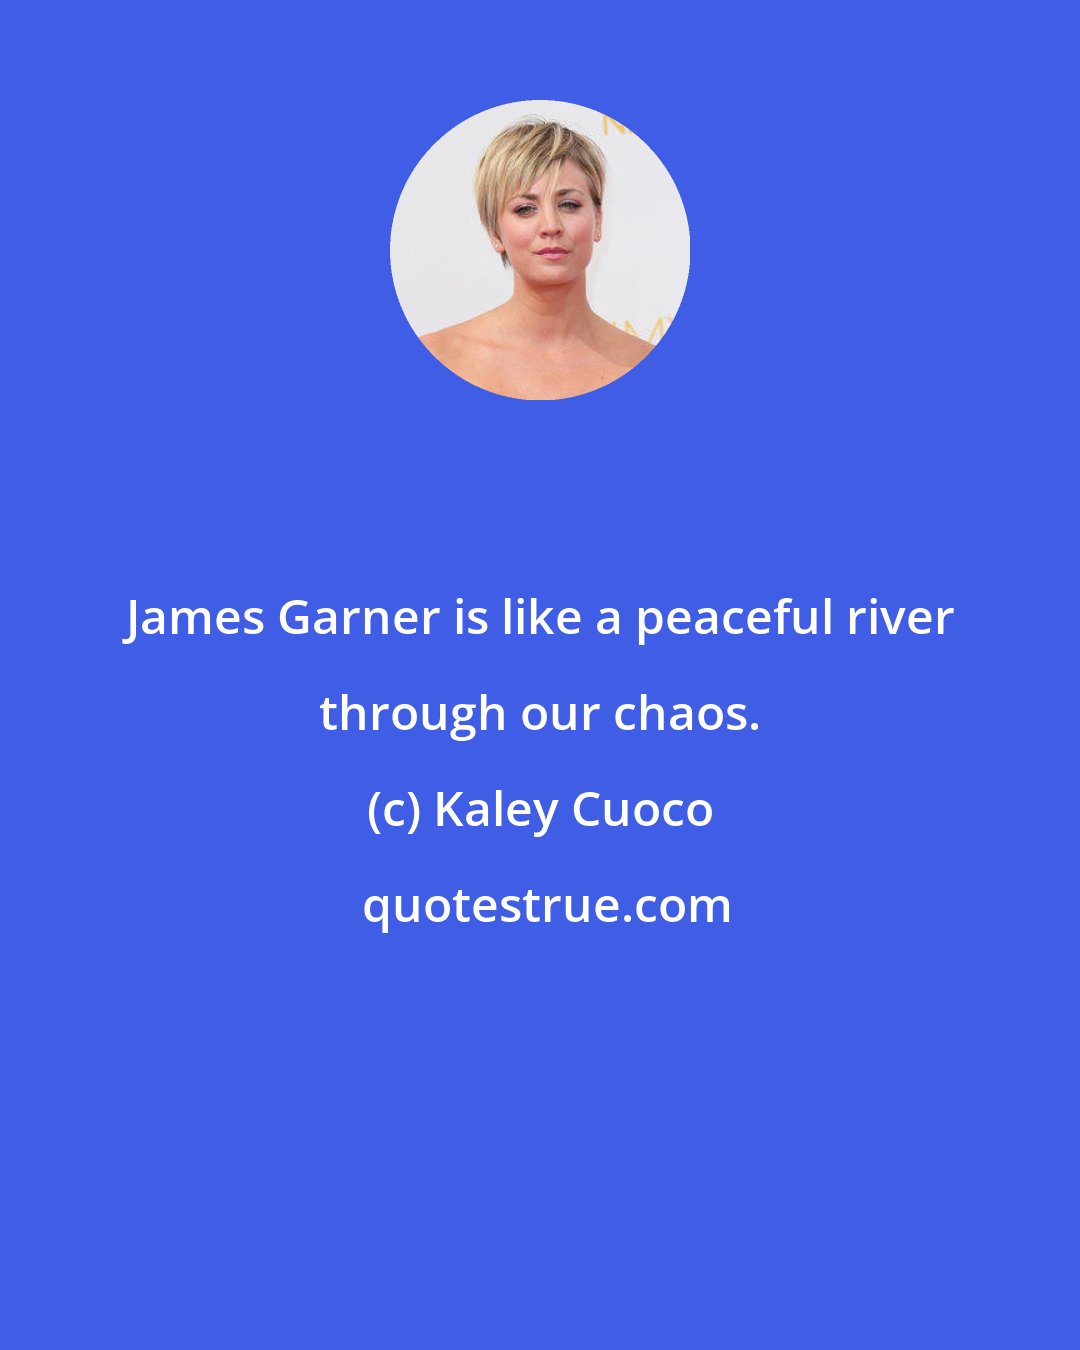 Kaley Cuoco: James Garner is like a peaceful river through our chaos.